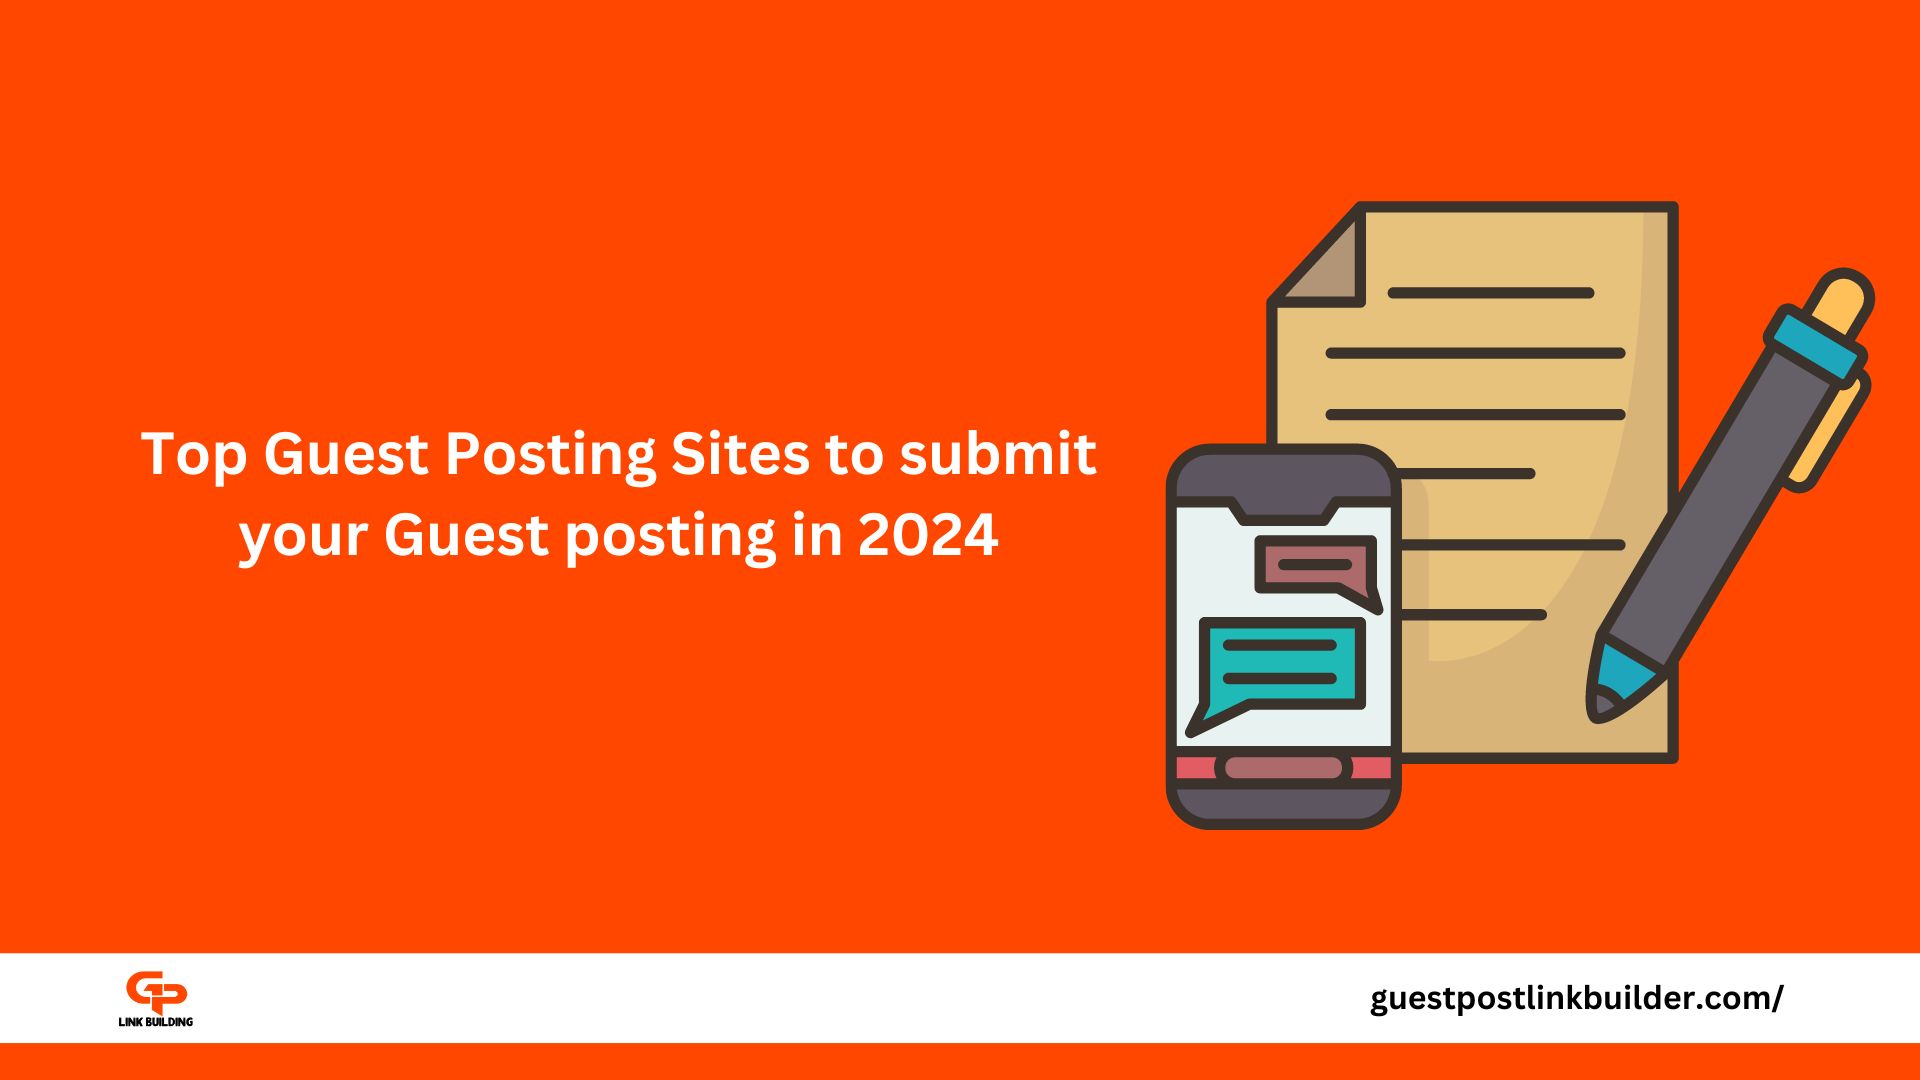 Top Guest Posting Sites to submit your Guest posting